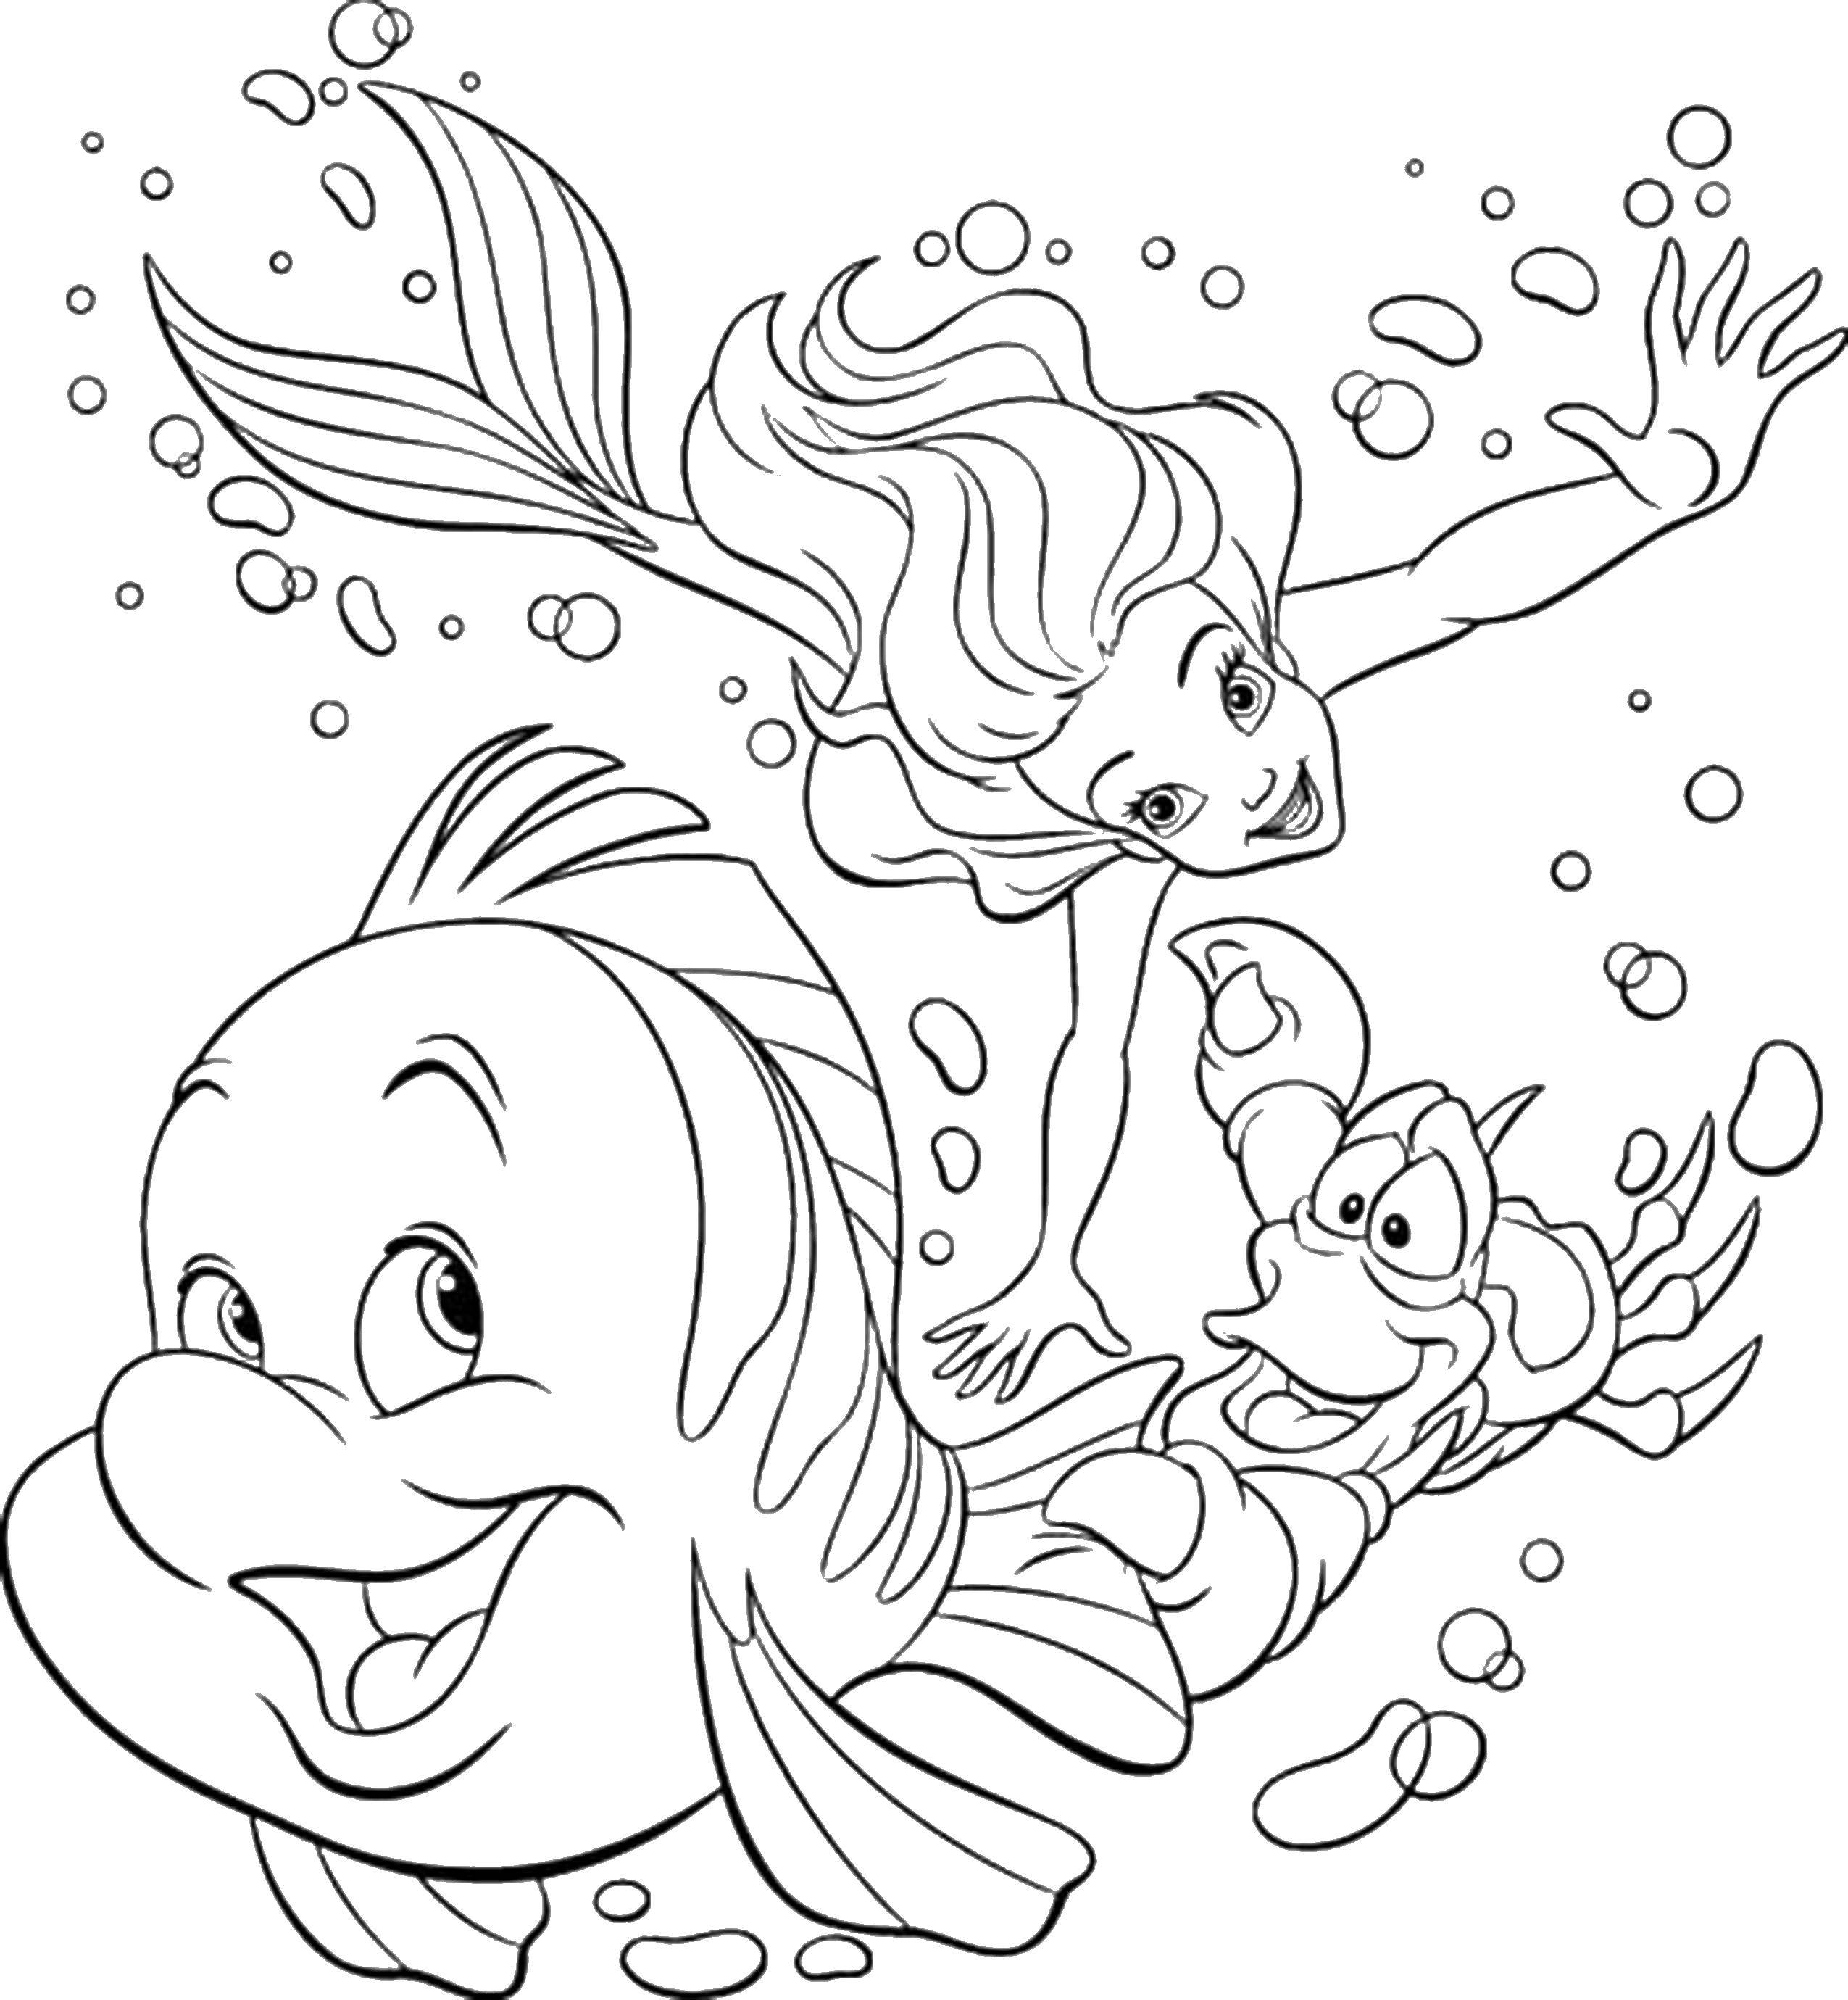 Coloring The little mermaid Ariel with friends. Category Disney cartoons. Tags:  Disney, the little mermaid, Ariel.